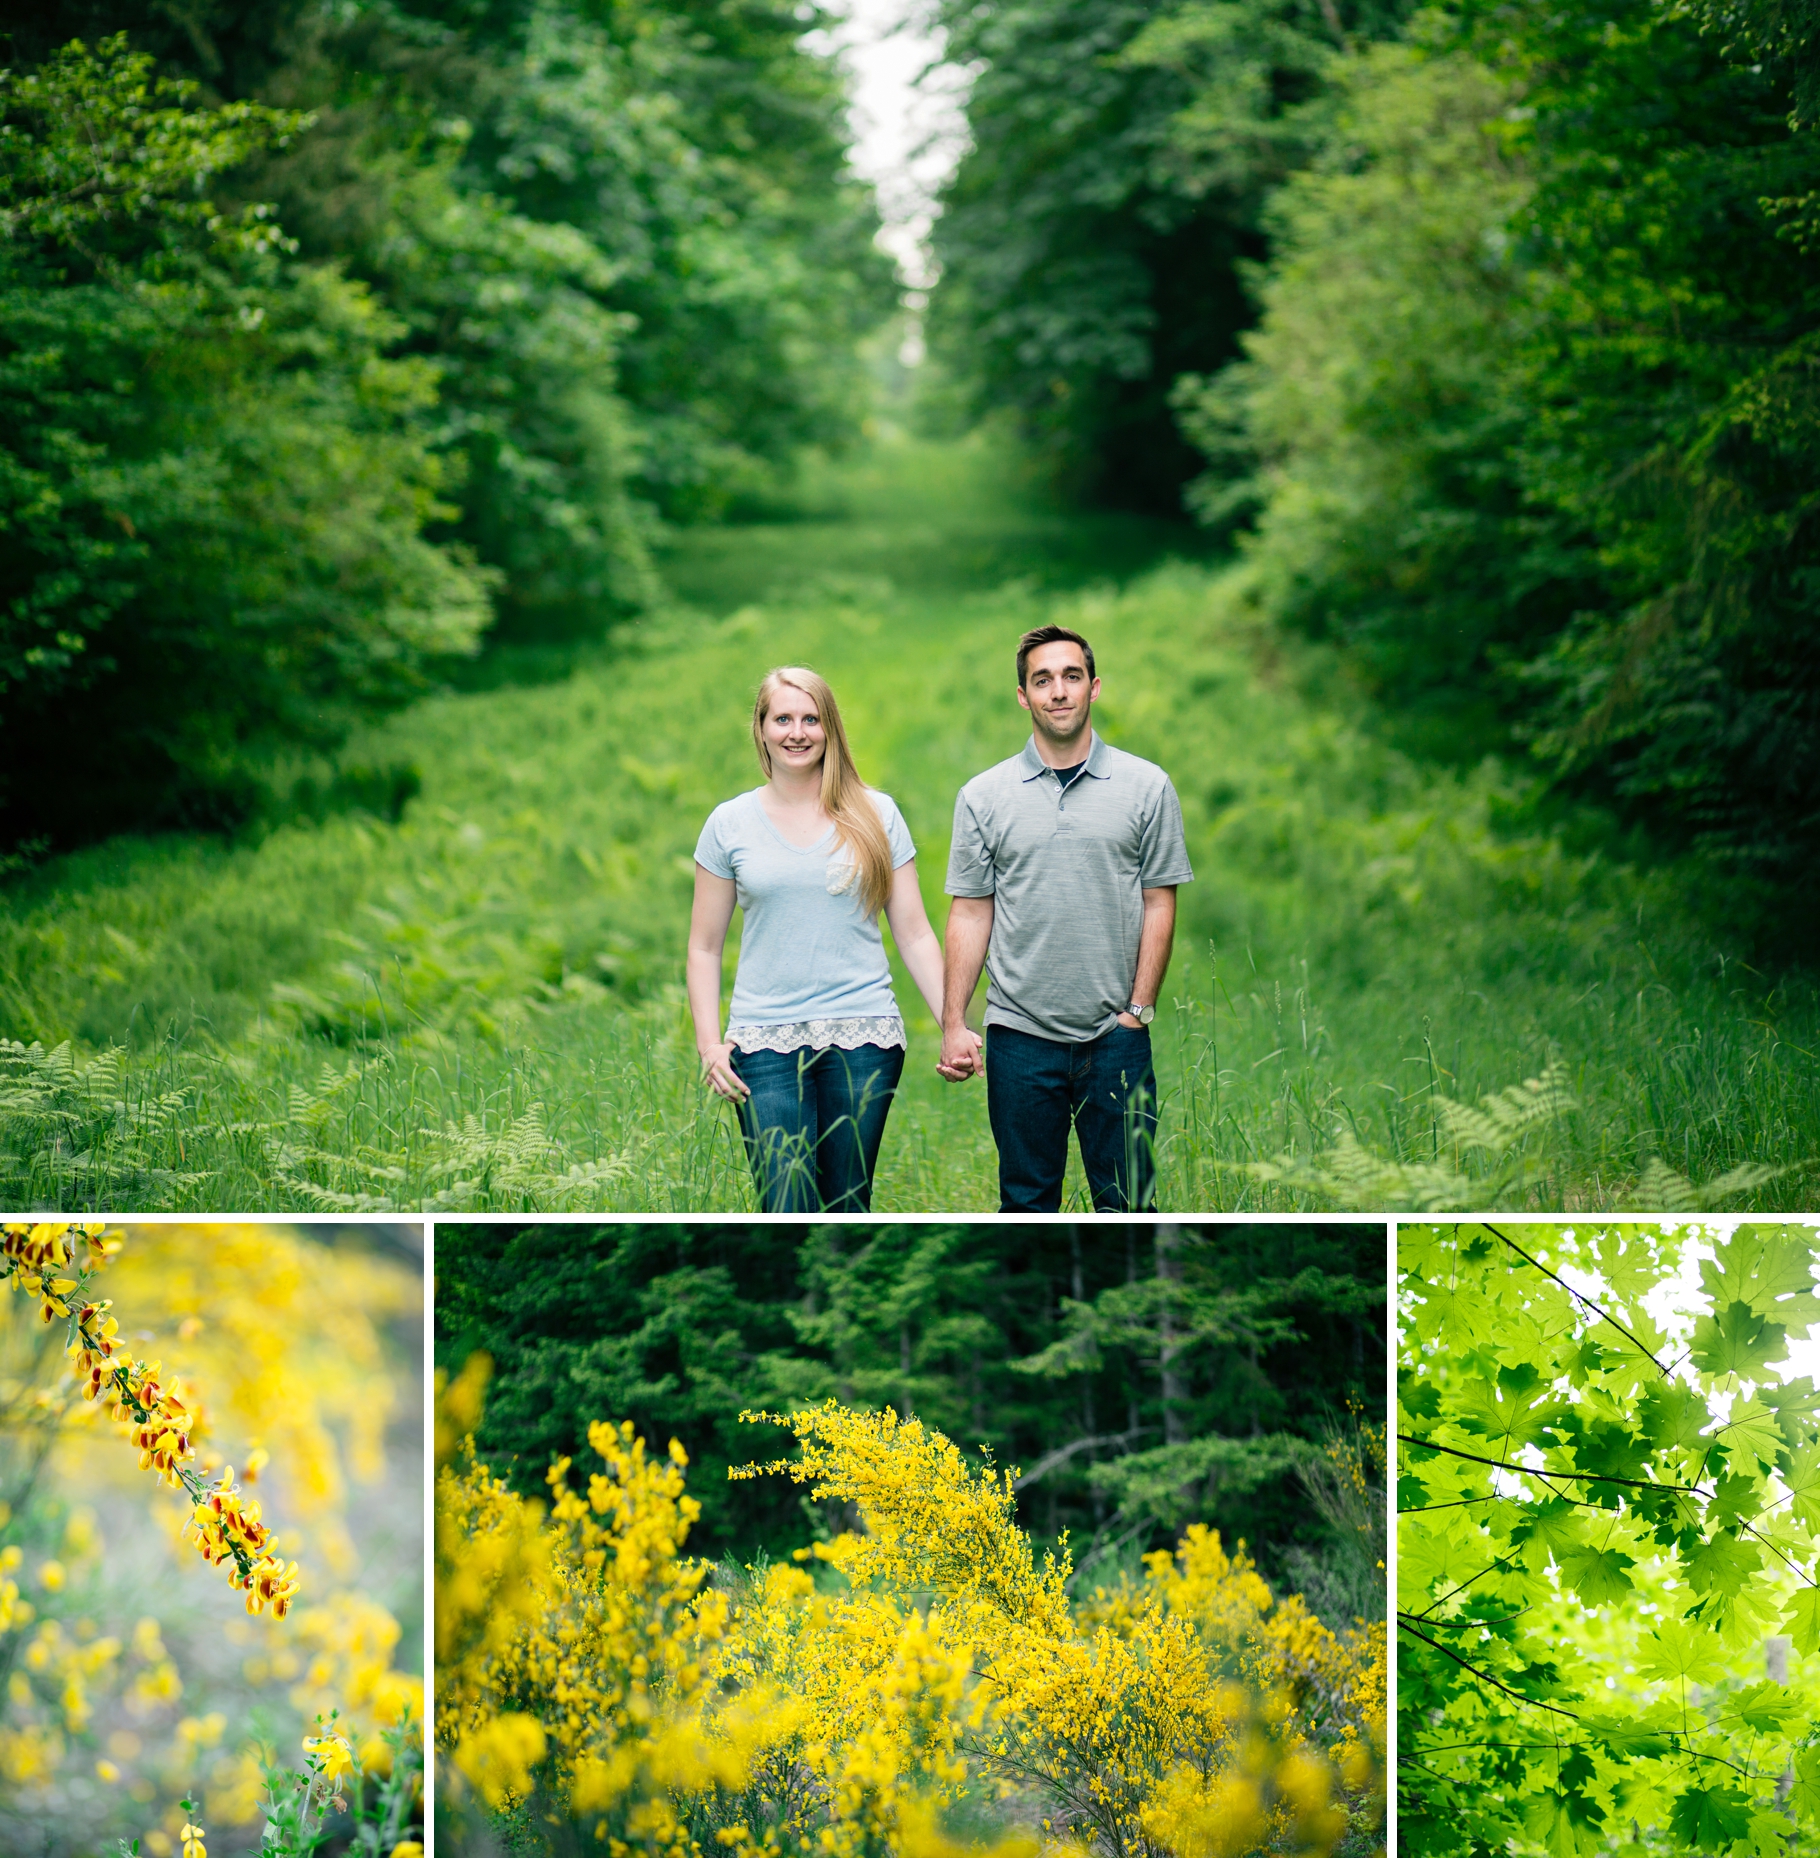 9-Issaquah-Hiking-Engagement-Photographer-Photos-Tradition-Lake-Loop-Trail-Yellow-Wild-Flowers-Seattle-Wedding-Photography-by-Betty-Elaine